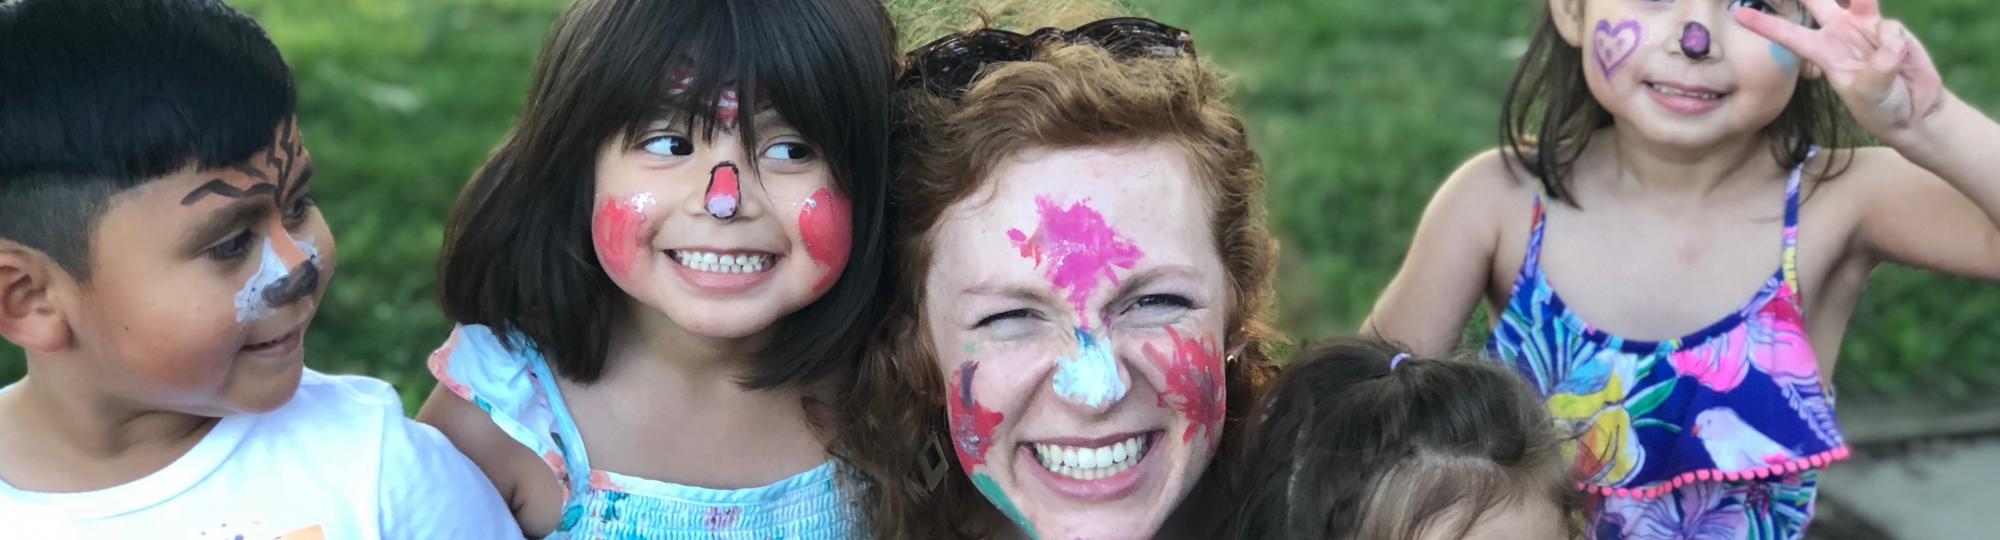 Smiling children and young woman wearing colorful face paint